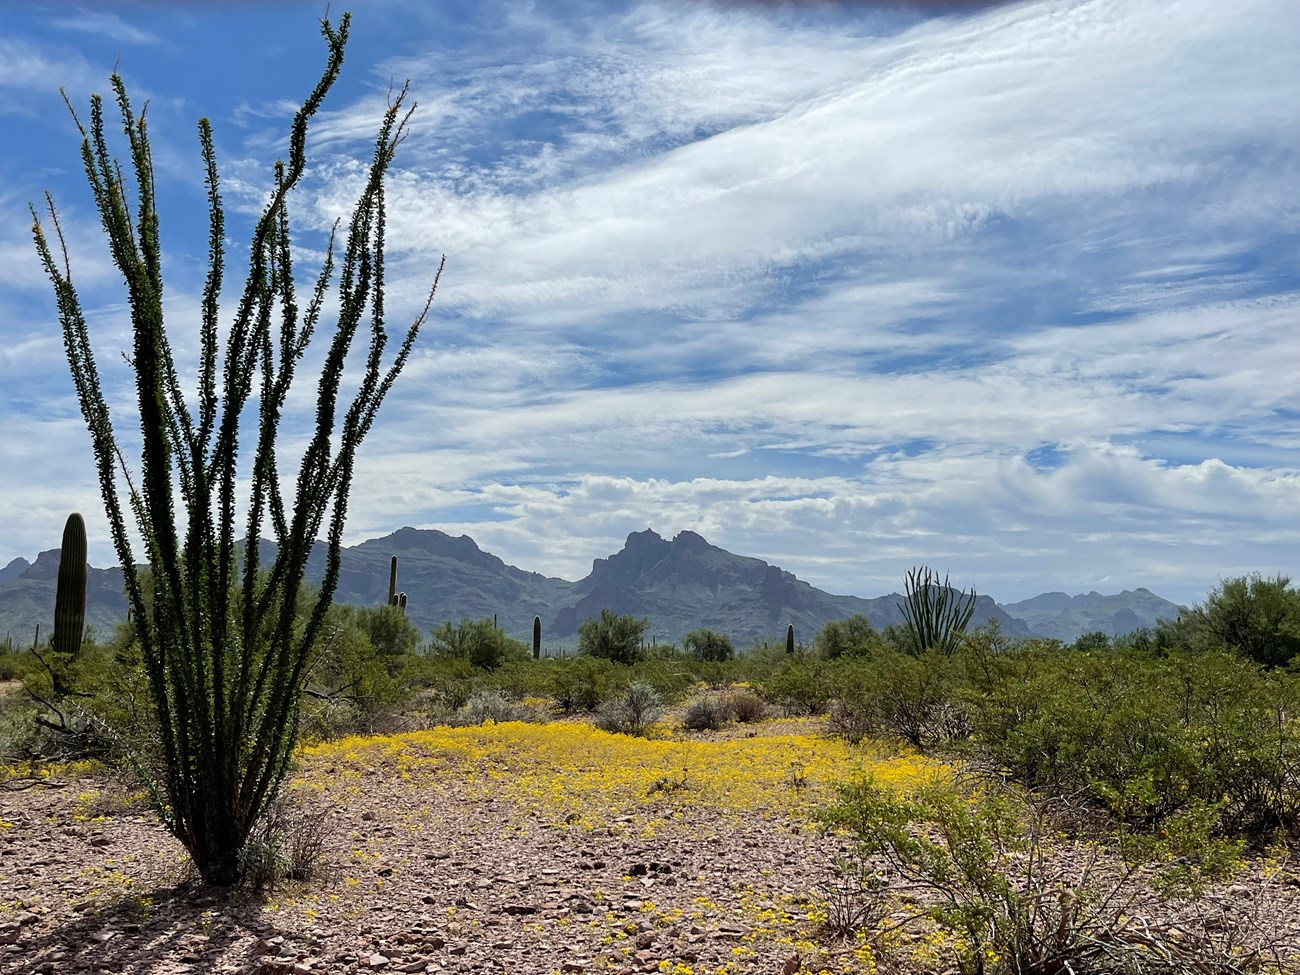 A leafy ocotillo stands in front of a mountain background.